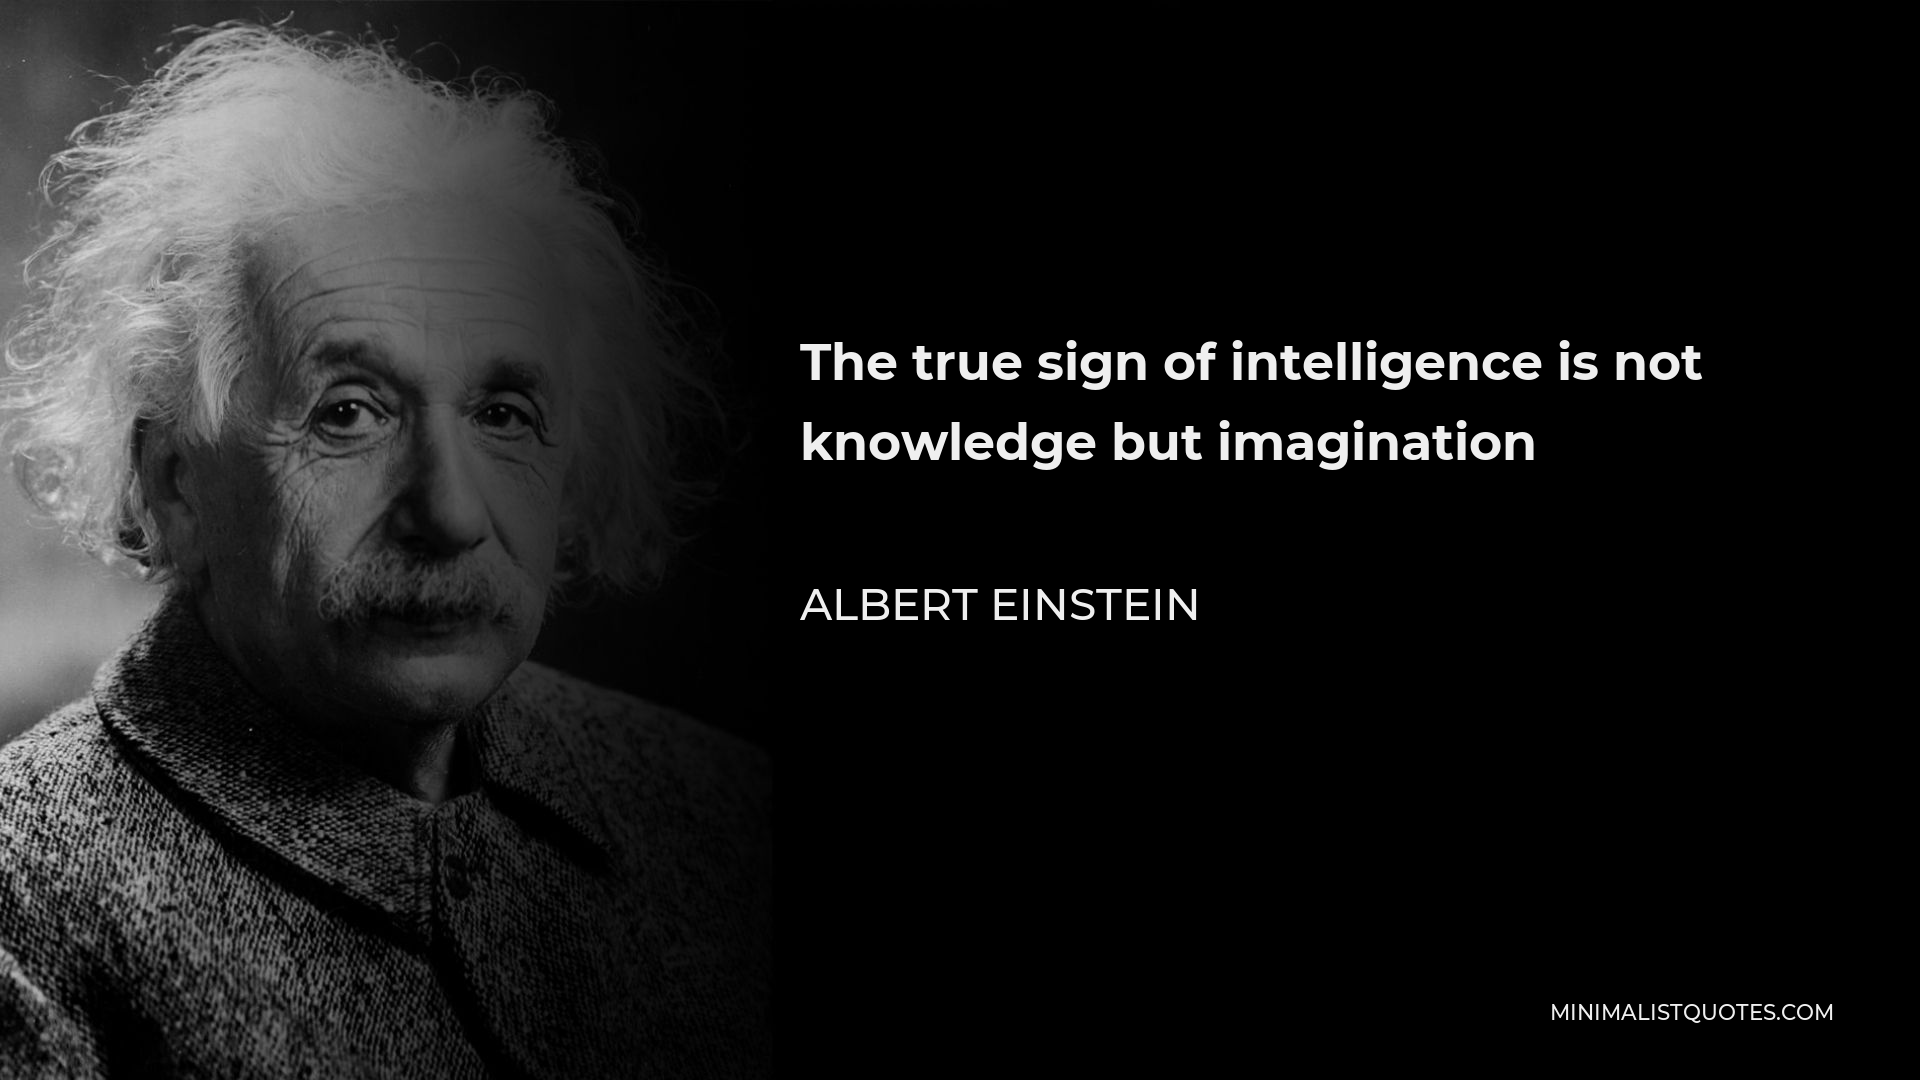 Albert Einstein Quote - The true sign of intelligence is not knowledge but imagination